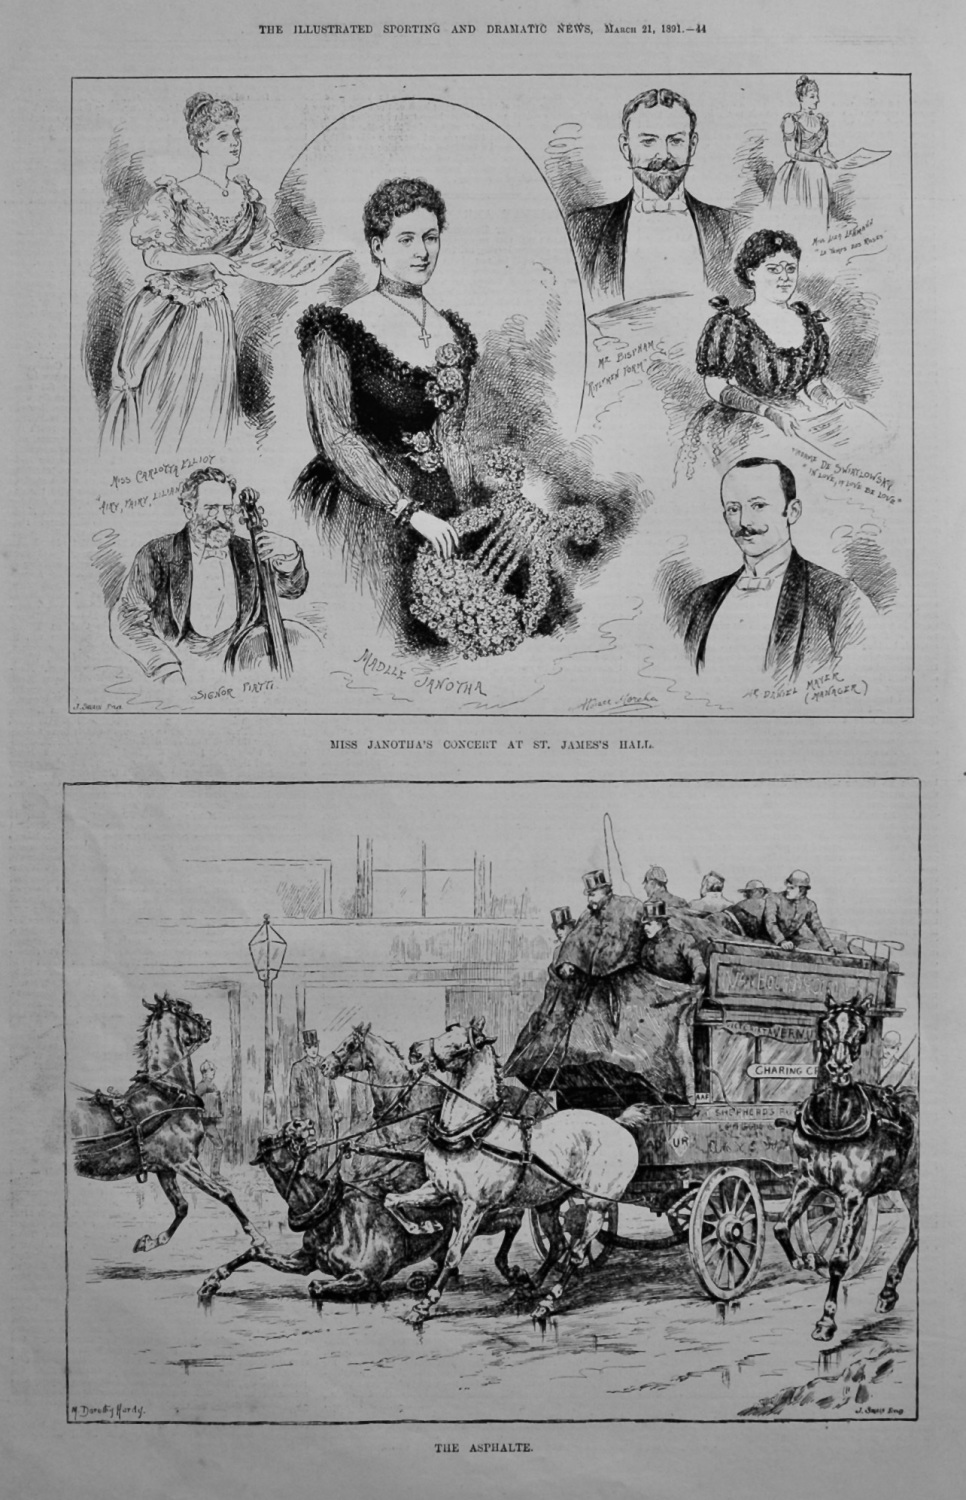 Miss Janotha's Concert at St. James's Hall.  1891.